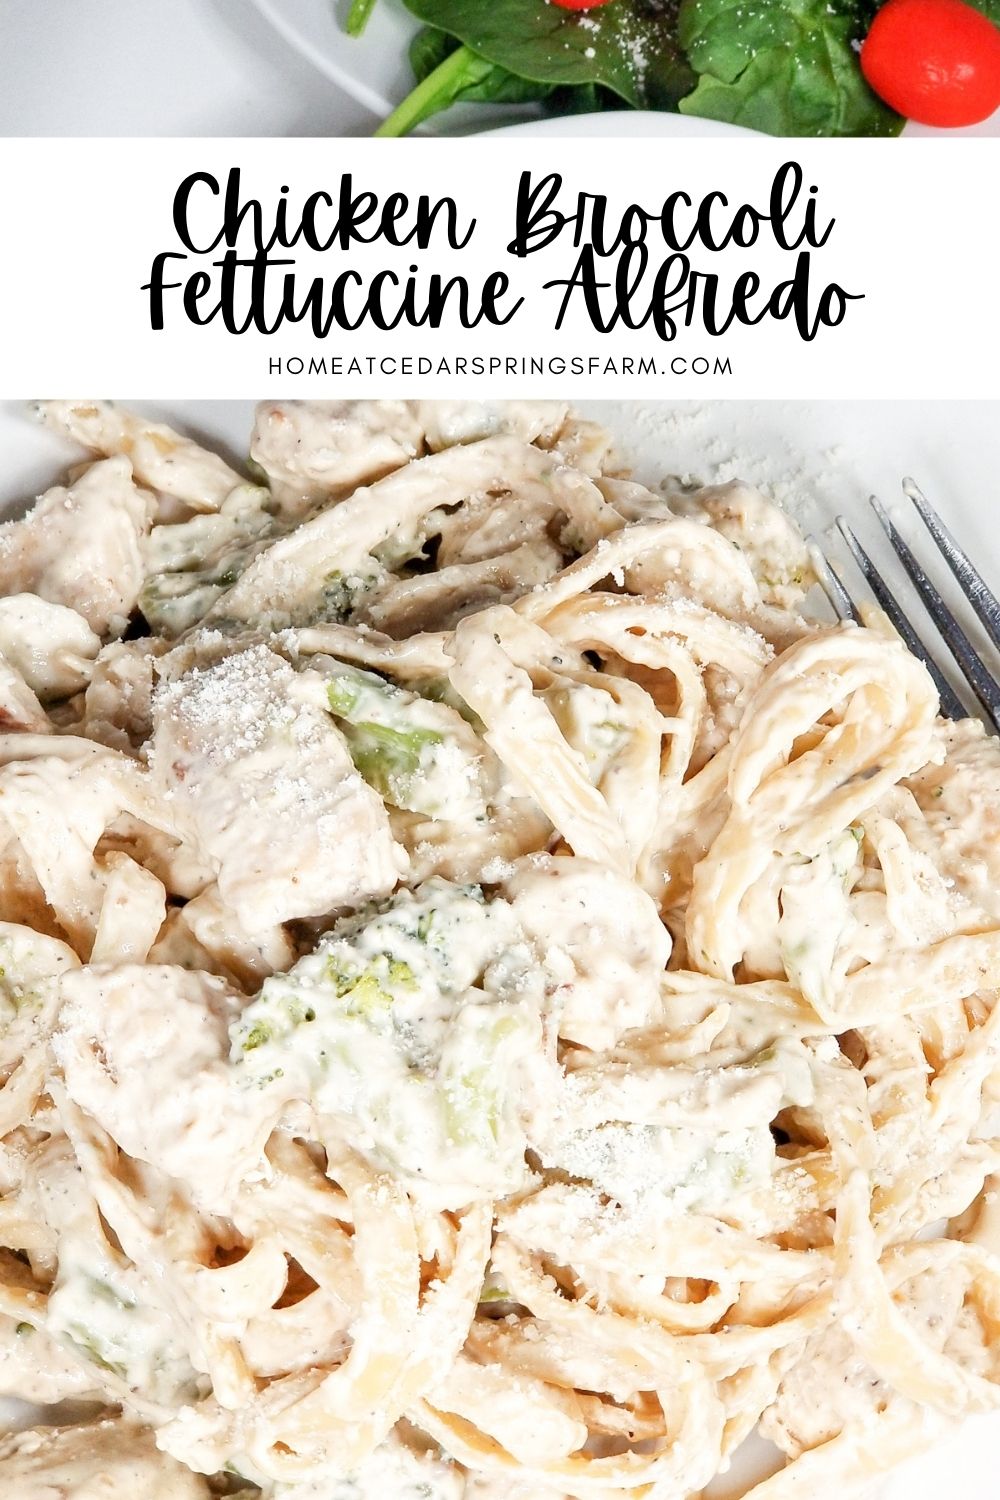 chicken broccoli fettuccine picture with overlay